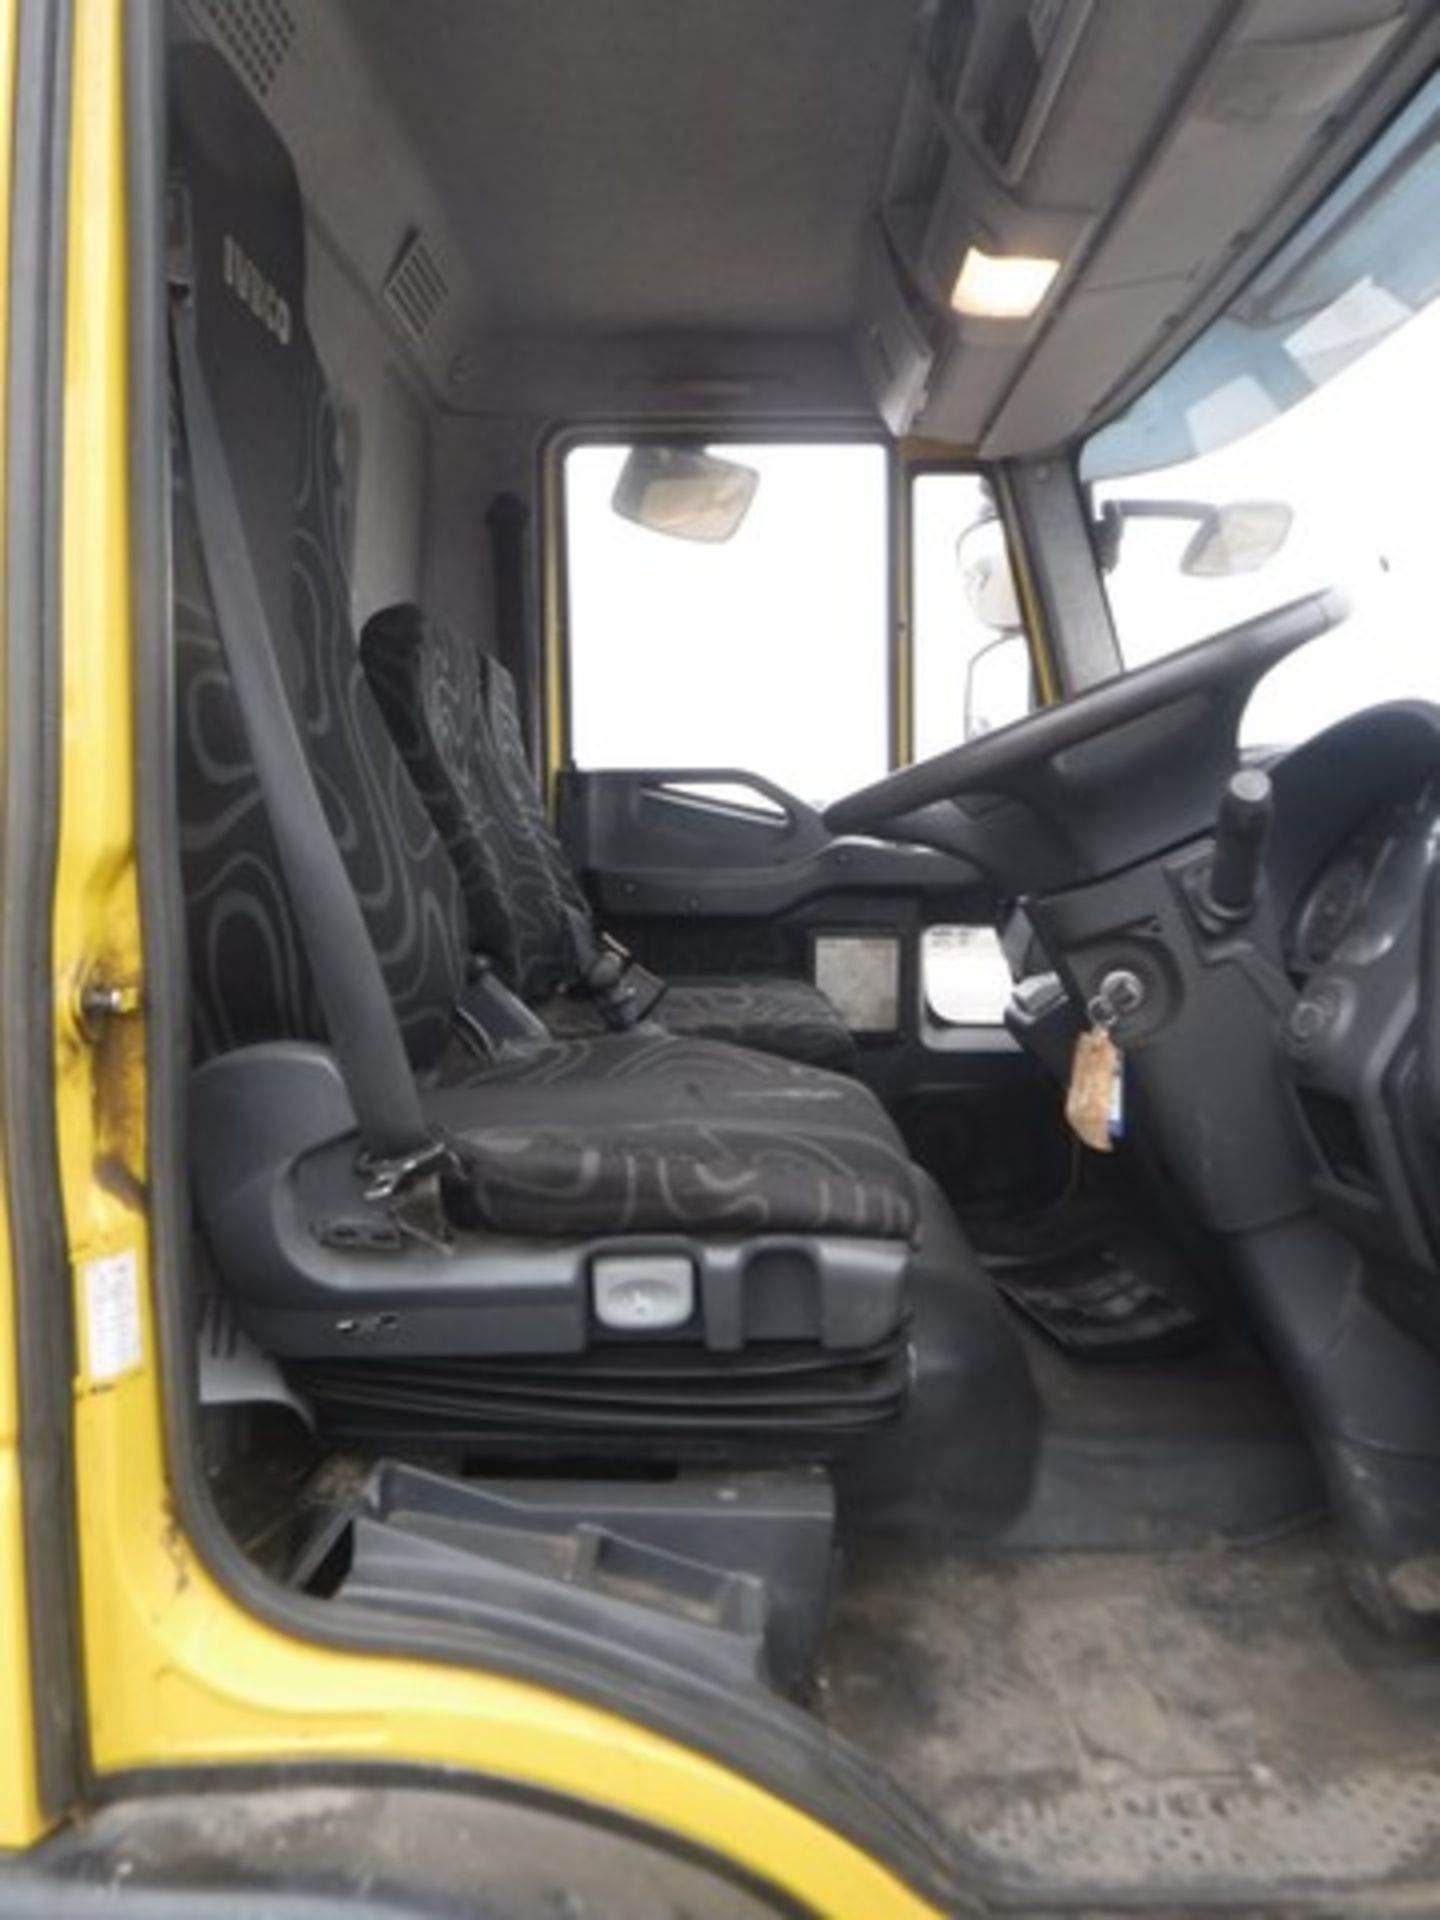 IVECO MODEL EUROCARGO (MY 2008) - 3920cc - Image 3 of 17